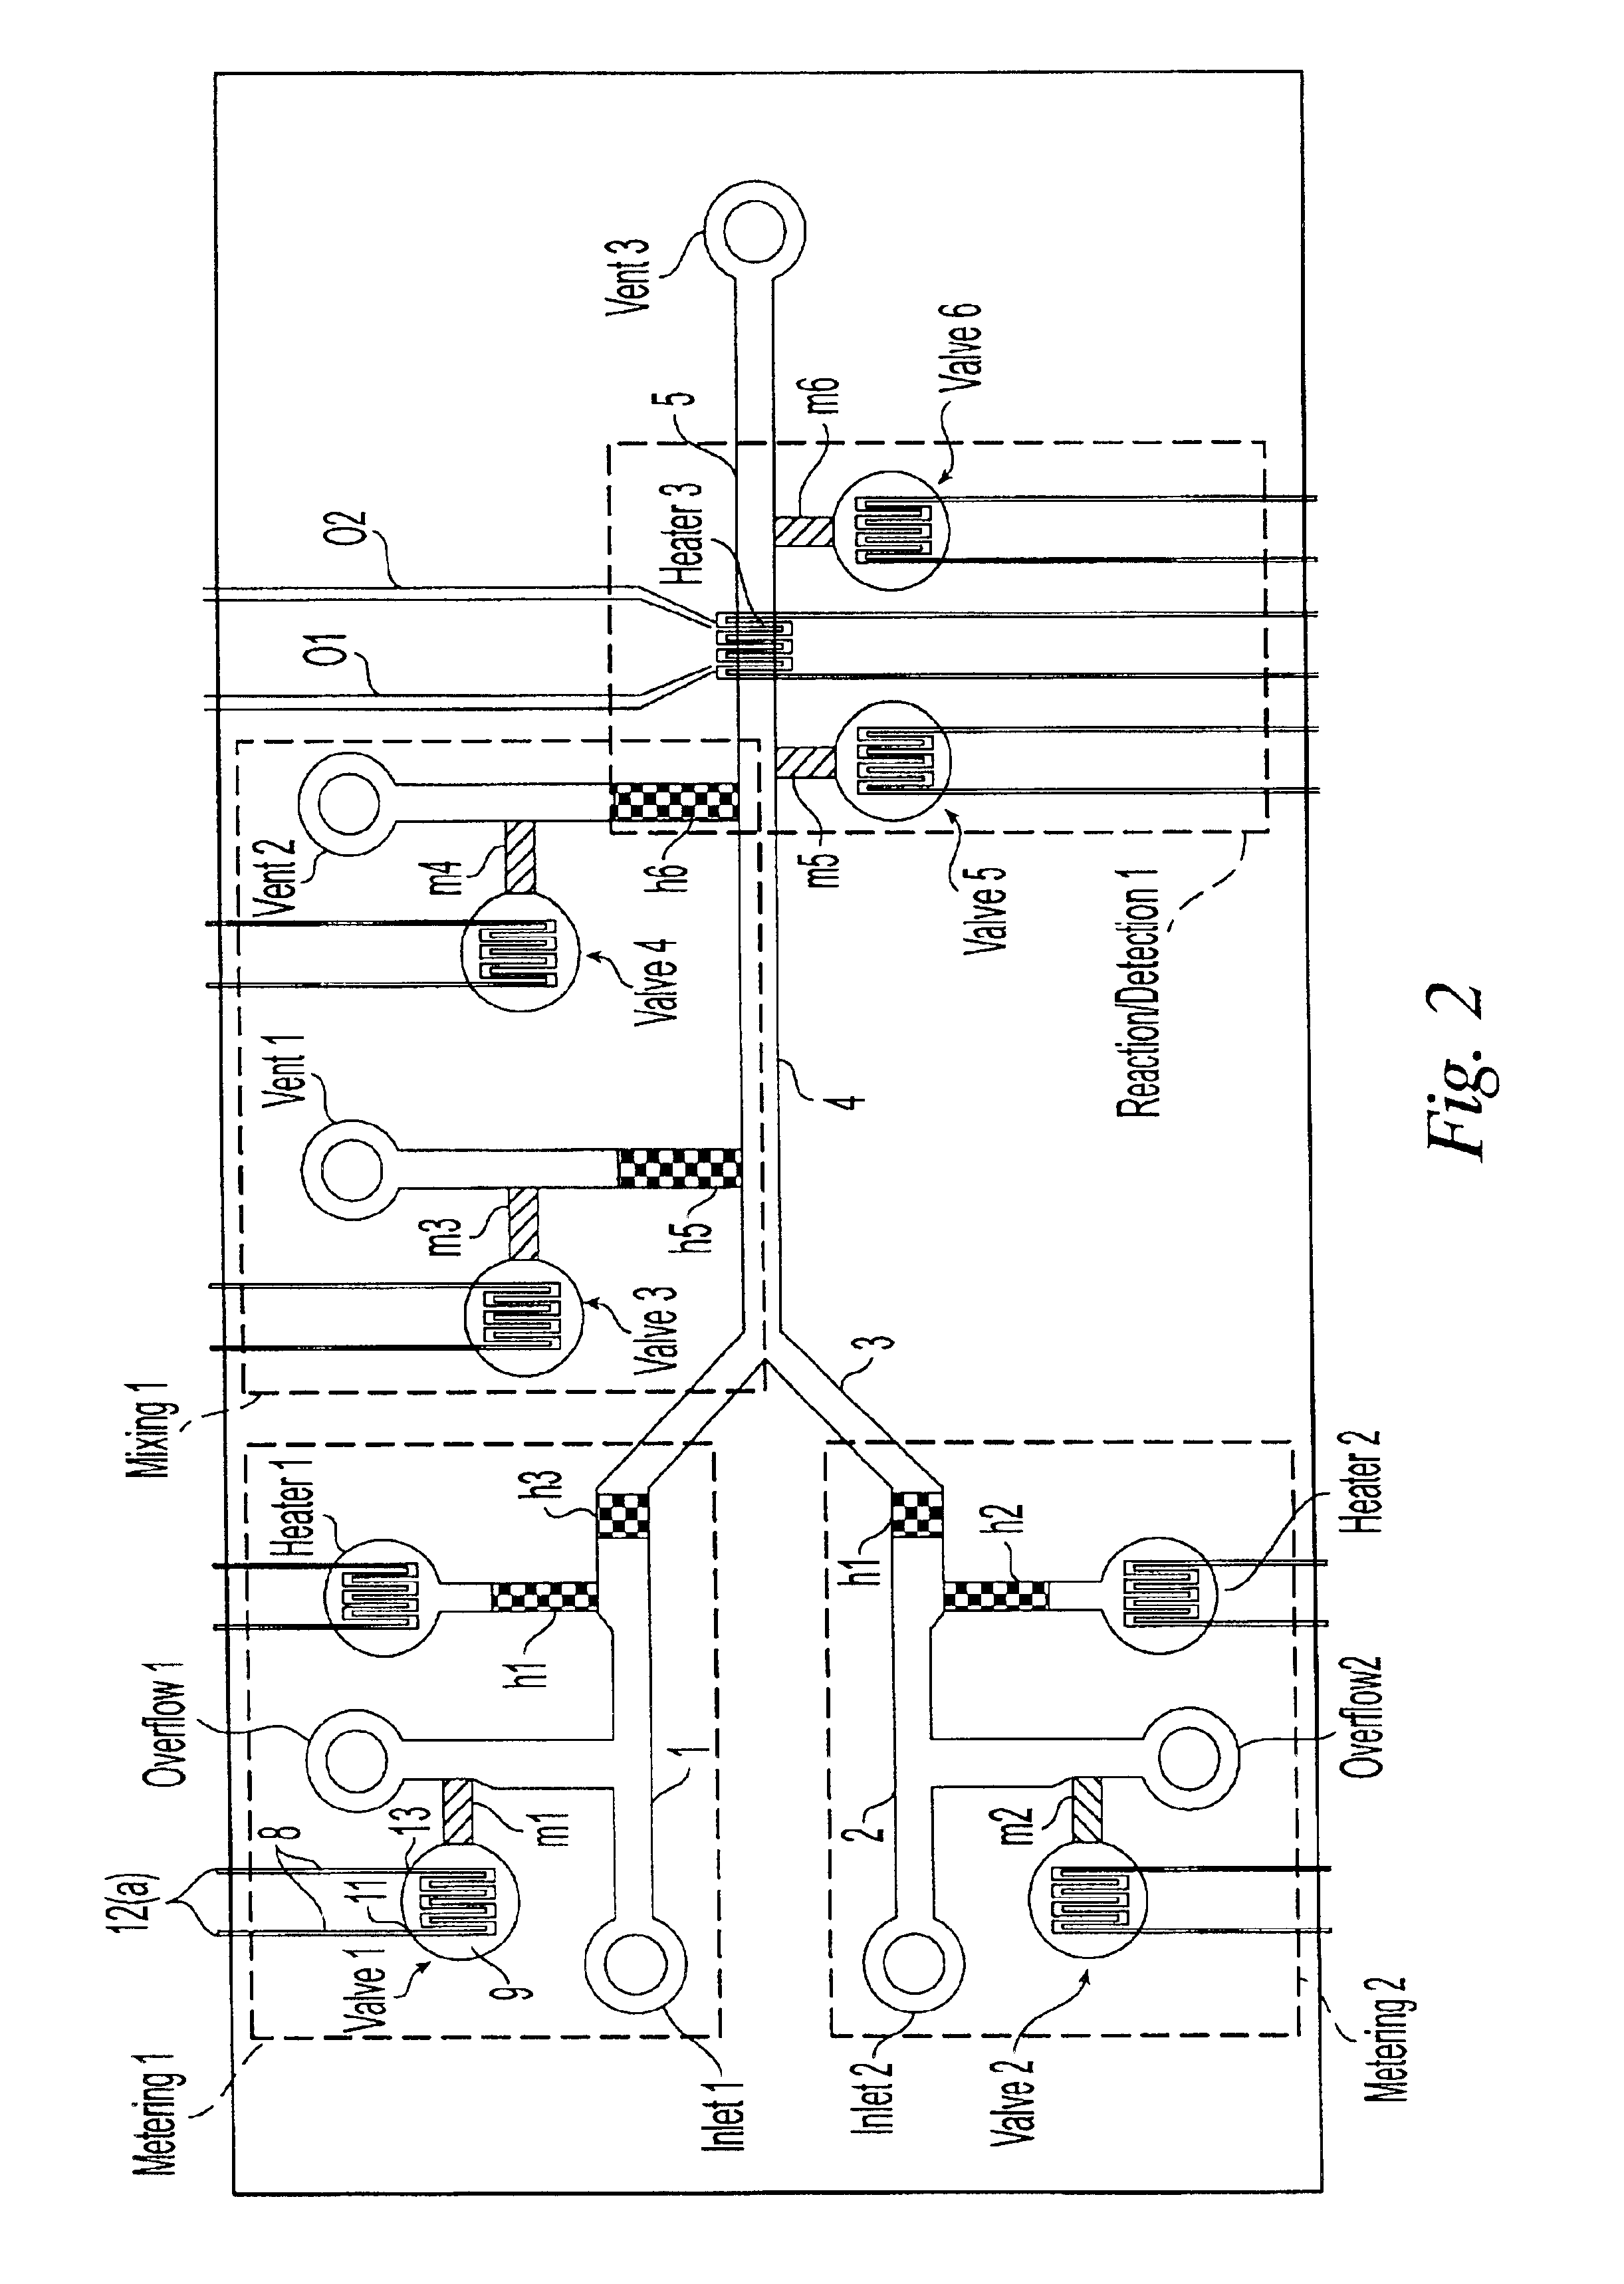 Microfluidic devices having a reduced number of input and output connections